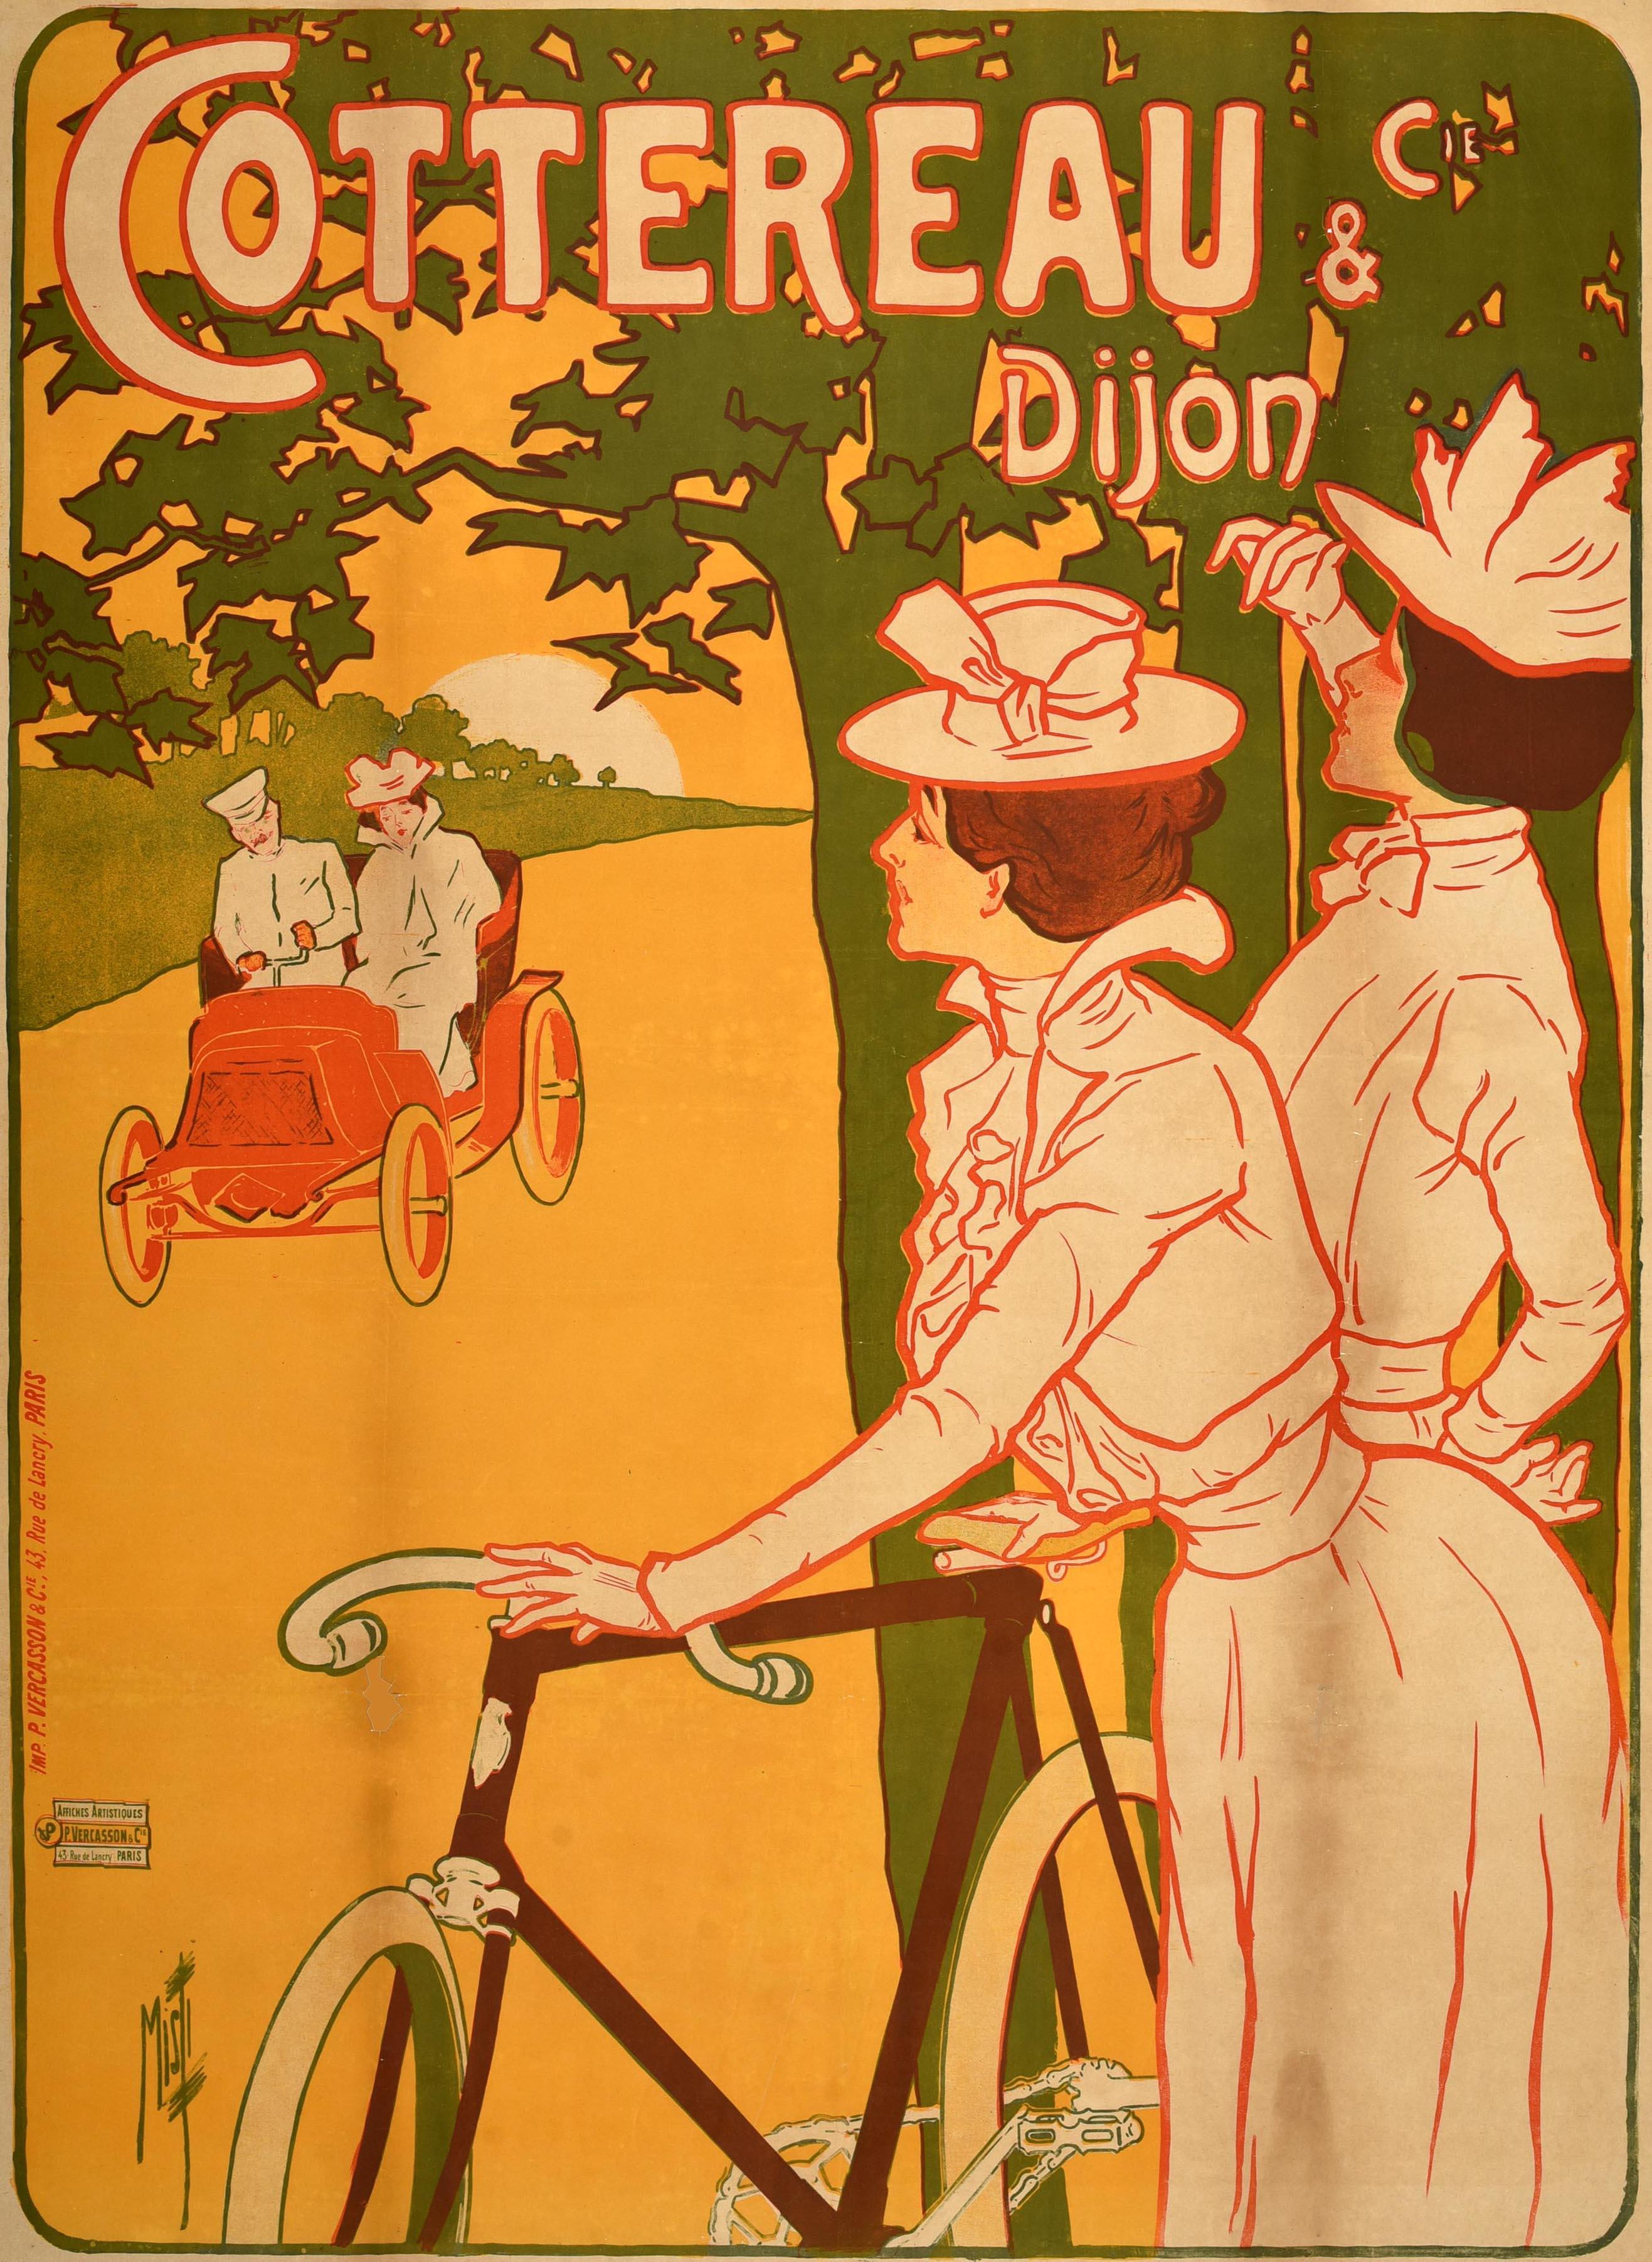 Original antique French advertising poster for Cottereau & Cie Dijon featuring Belle Epoque artwork by Misti (Ferdinand Mifliez; 1865-1923) of two ladies in fashionable dresses and hats standing with a bicycle by trees and looking at a couple